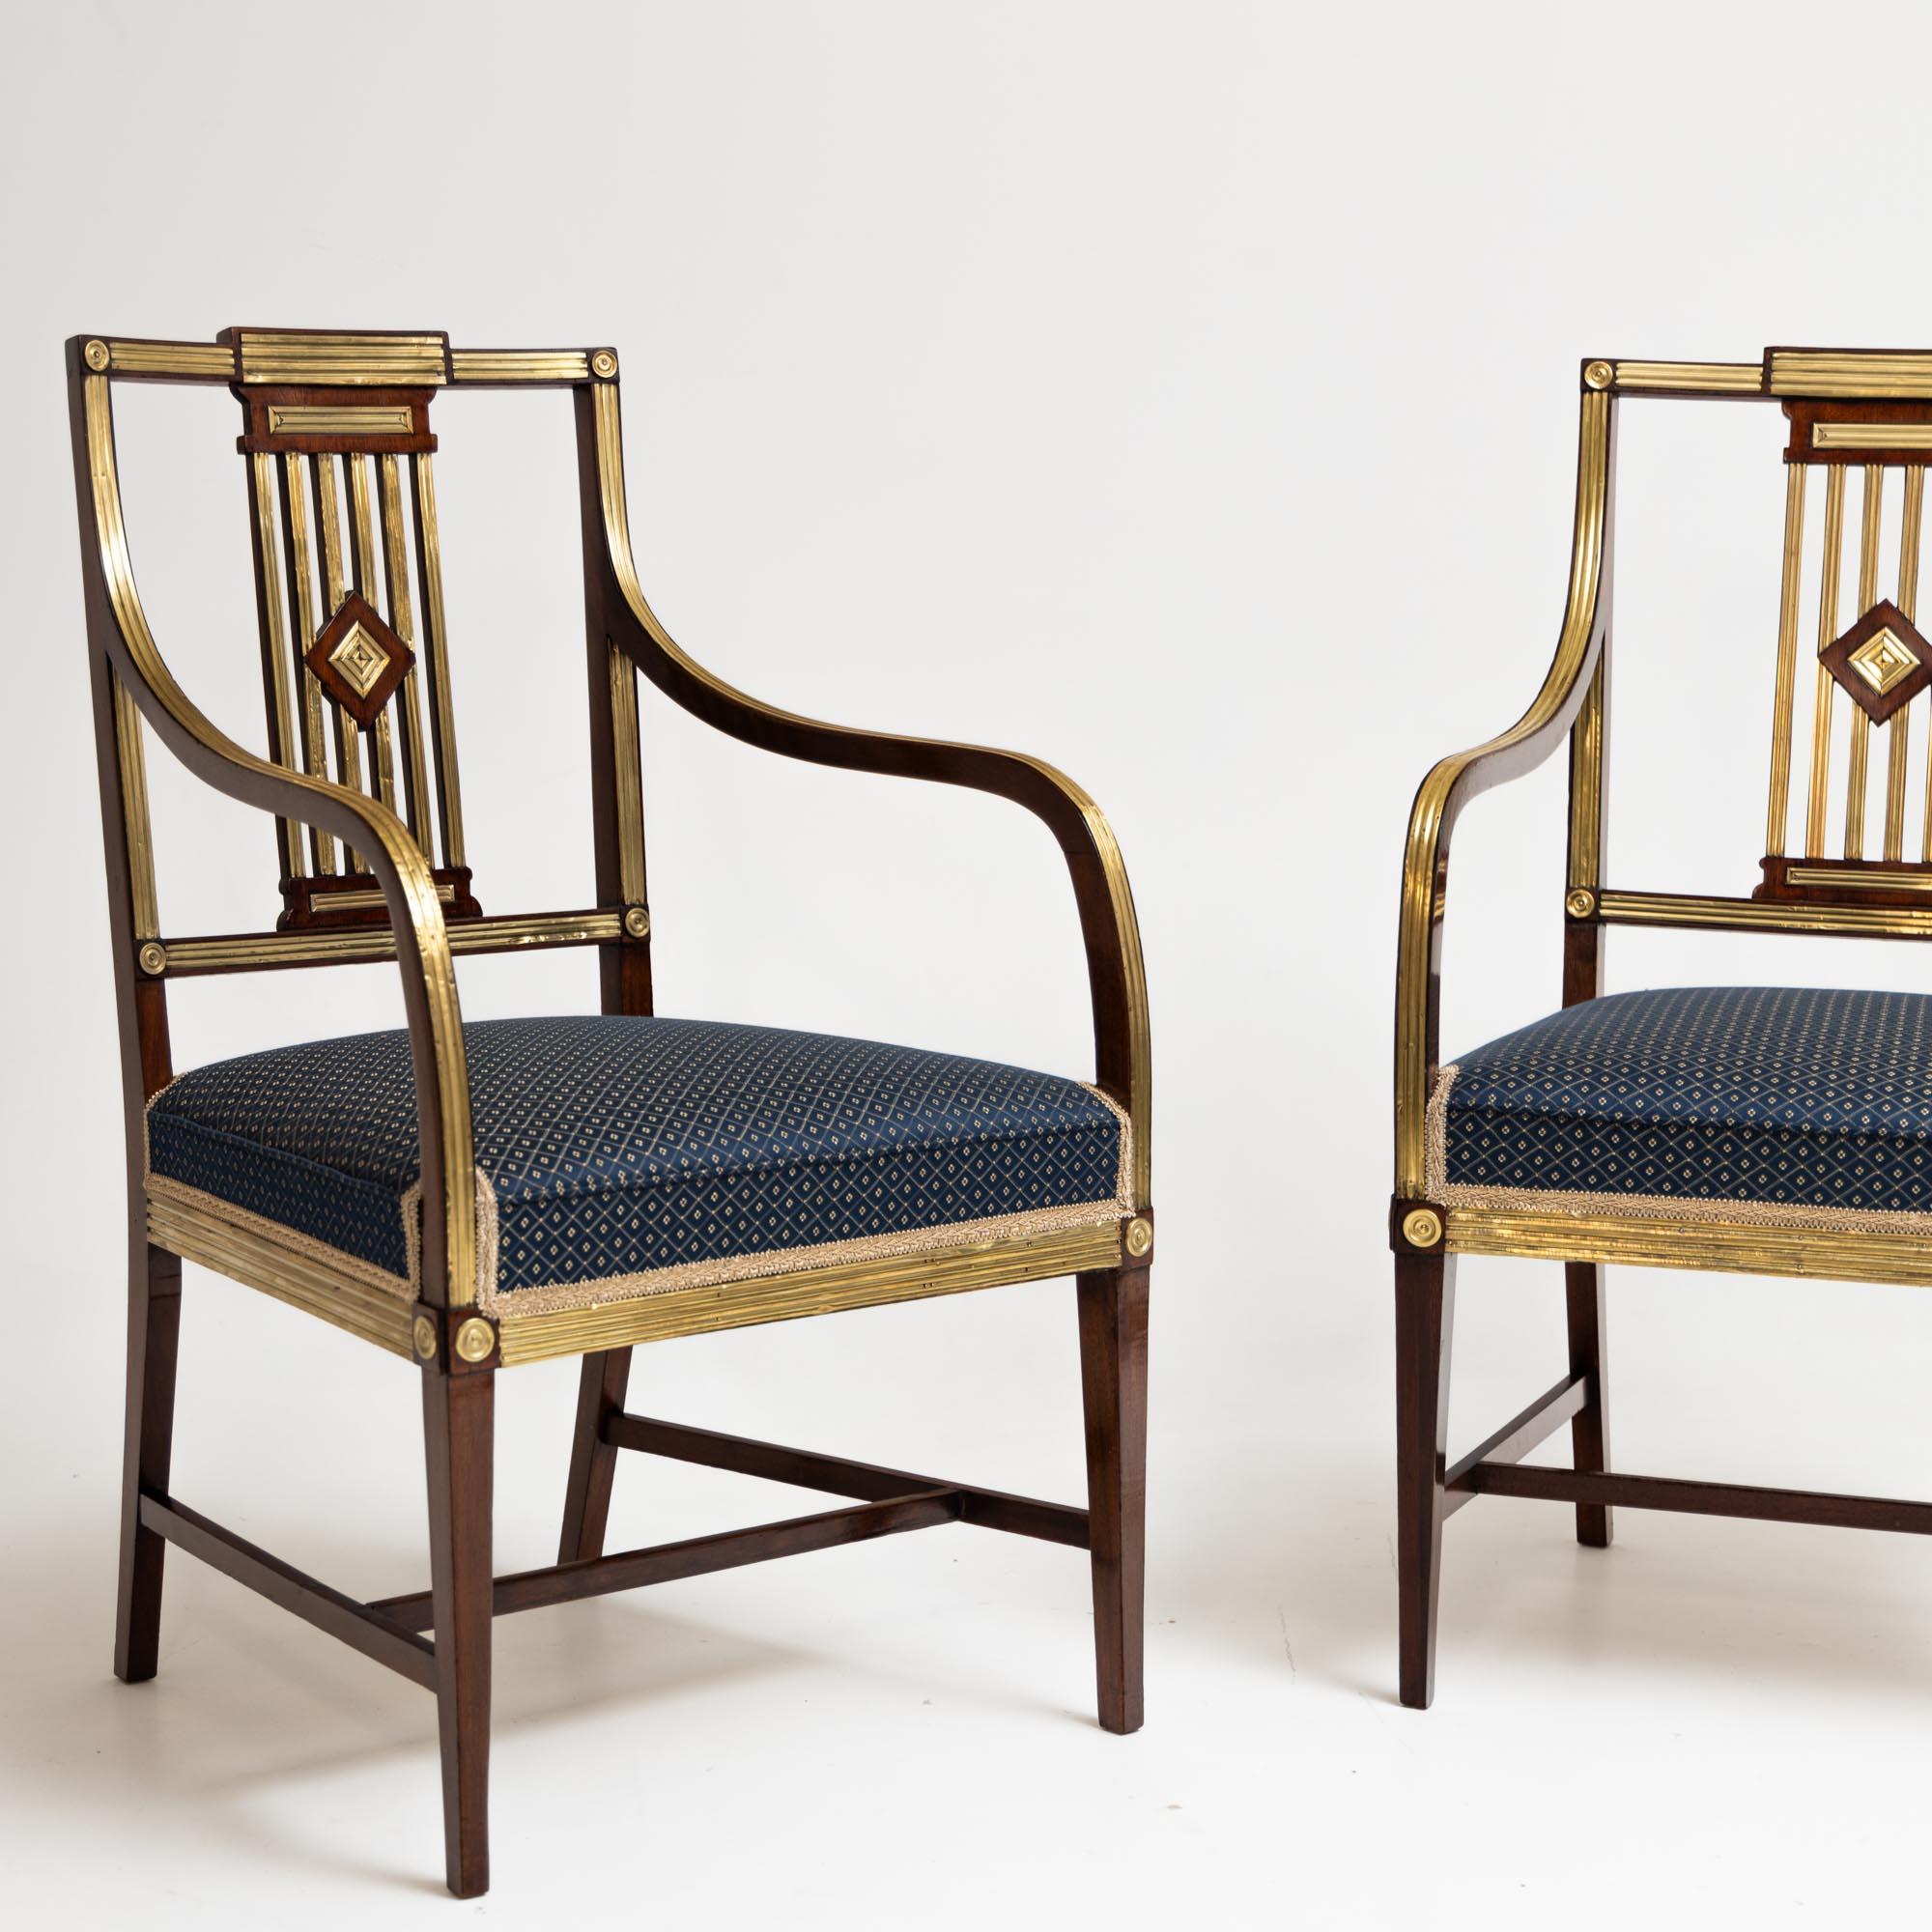 Polished Pair of Neoclassical Dining Room Chairs, Brass, Baltic States, Late 18th Century